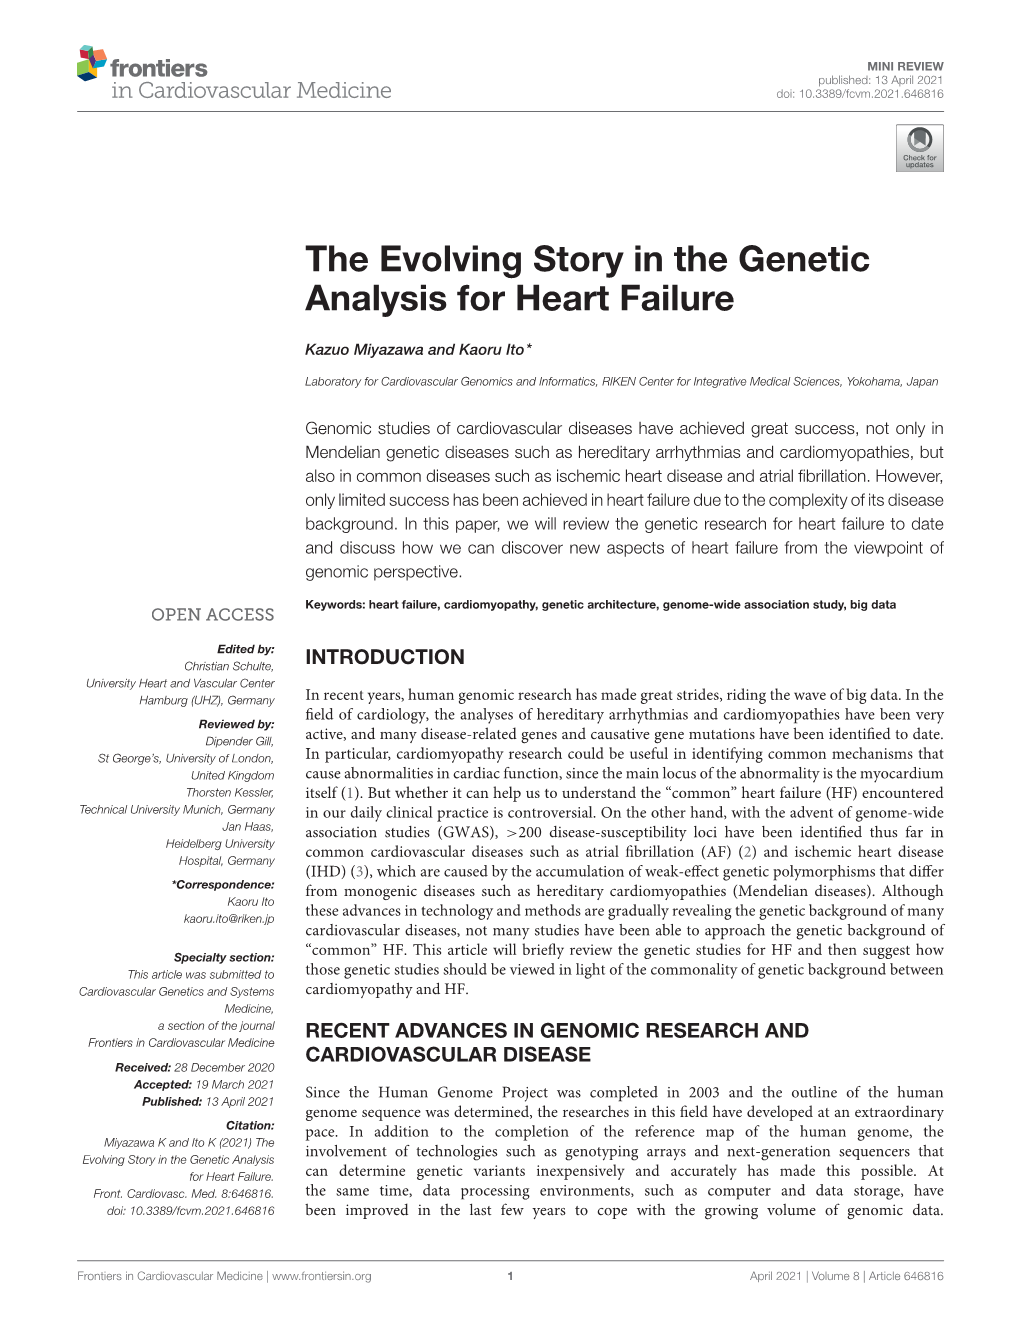 The Evolving Story in the Genetic Analysis for Heart Failure